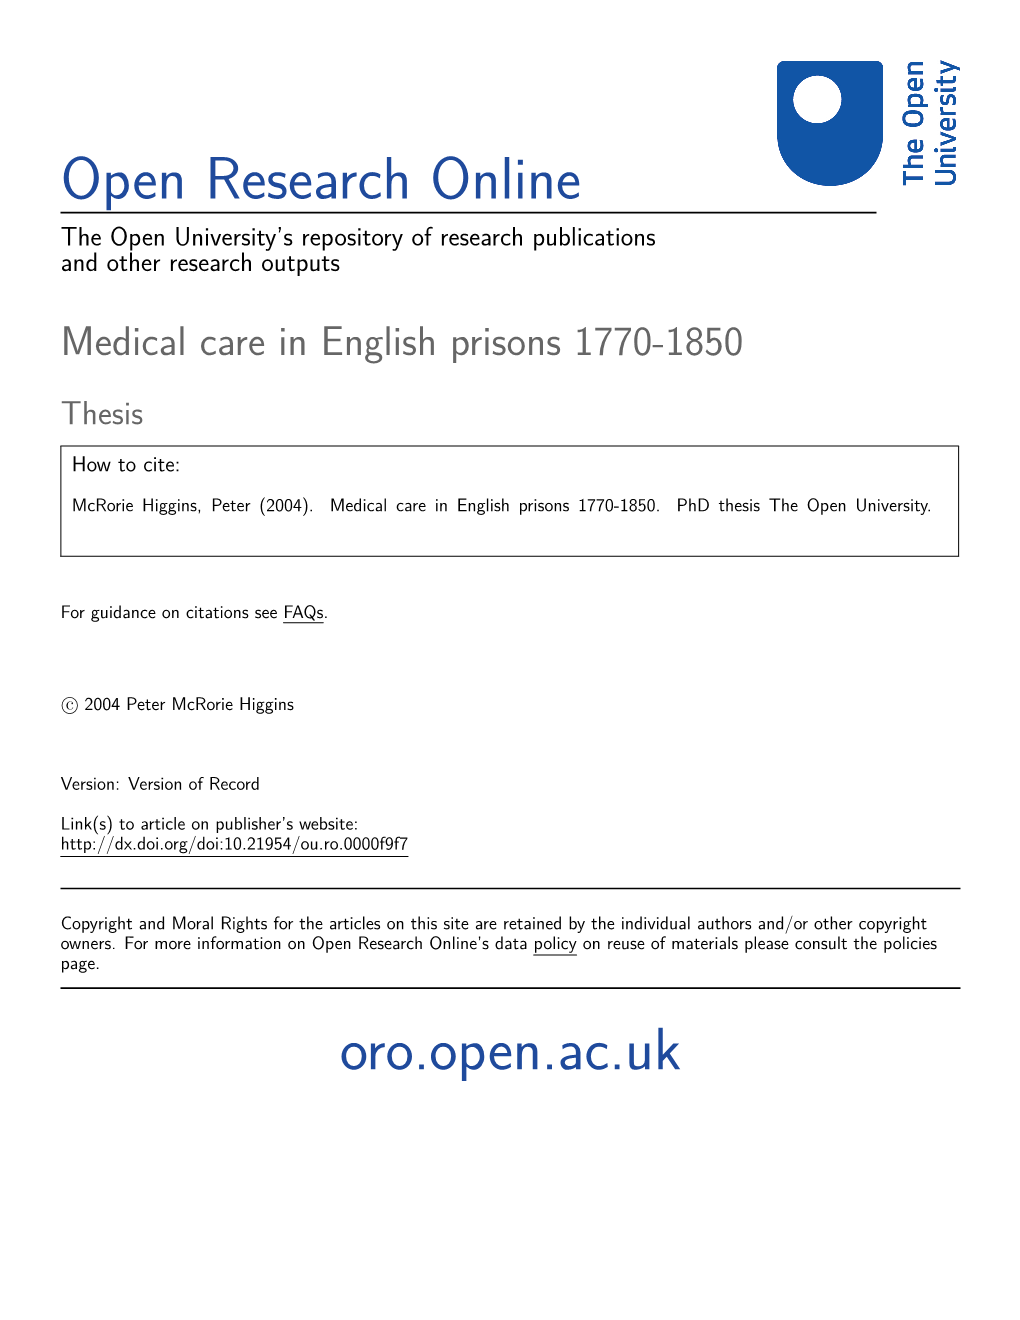 Medical Care in English Prisons 1770-1850